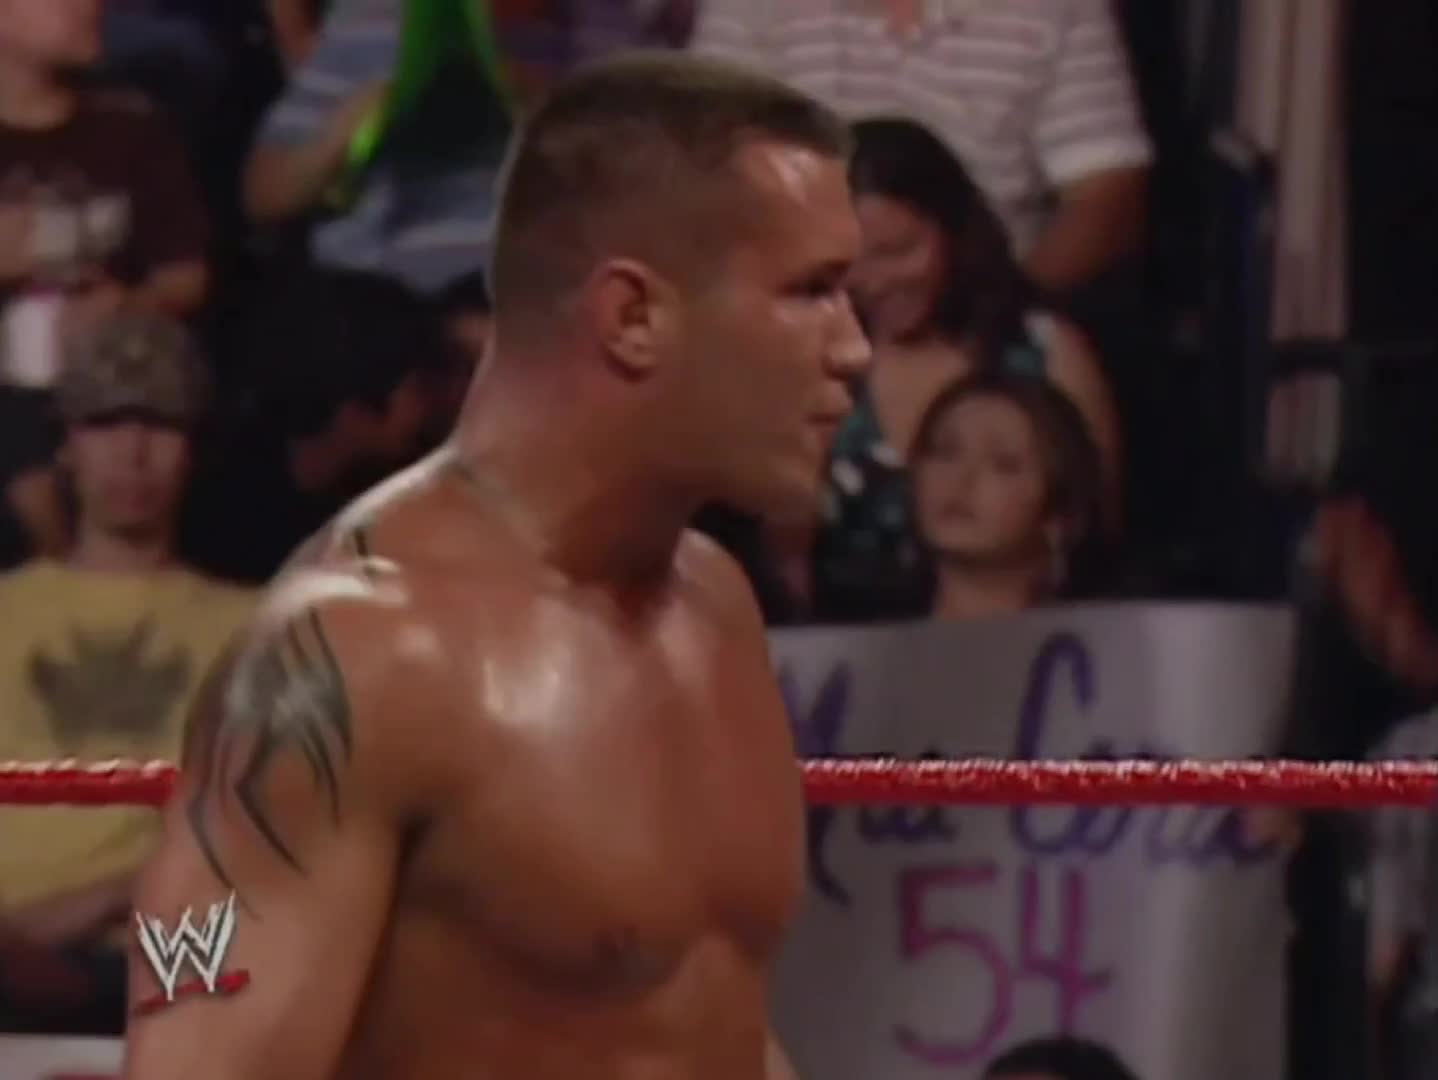 In his WWE debut match, Cody Rhodes almost beat Randy Orton with a hot near fall off of a missile dropkick as the women in the crowd went absolutely nuts for both of them. 